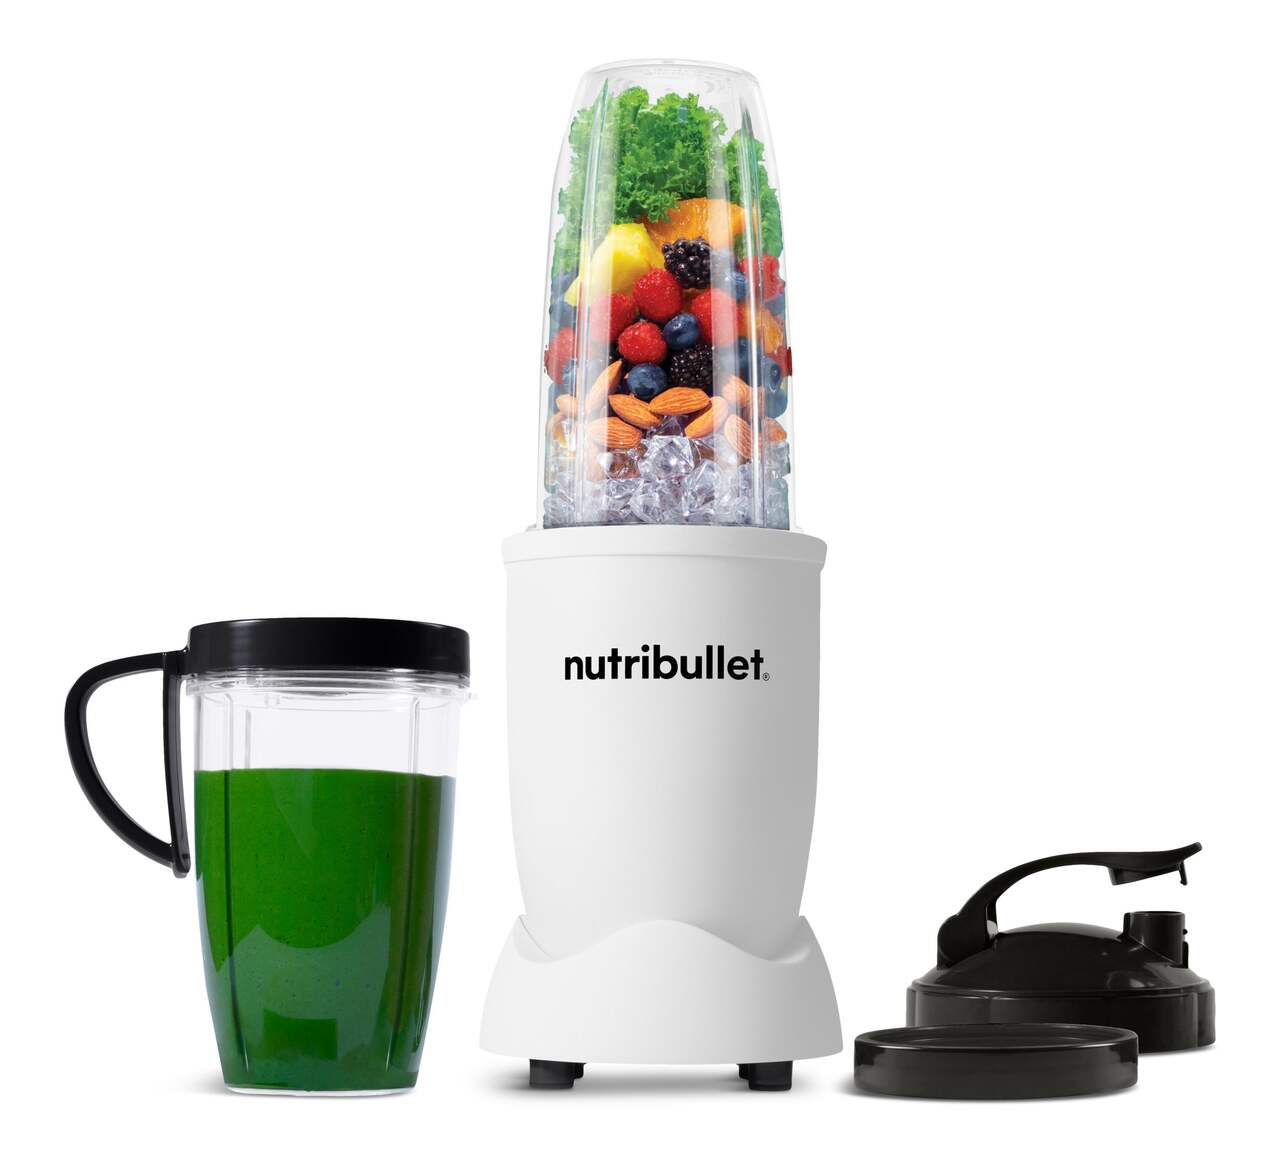 https://media-www.canadiantire.ca/product/living/kitchen/kitchen-appliances/0430303/nutribullet-magic-bullet-900-matte-white-bbd89bc5-8caa-4d5f-8cbb-5d78fbe05a31-jpgrendition.jpg?imdensity=1&imwidth=1244&impolicy=mZoom